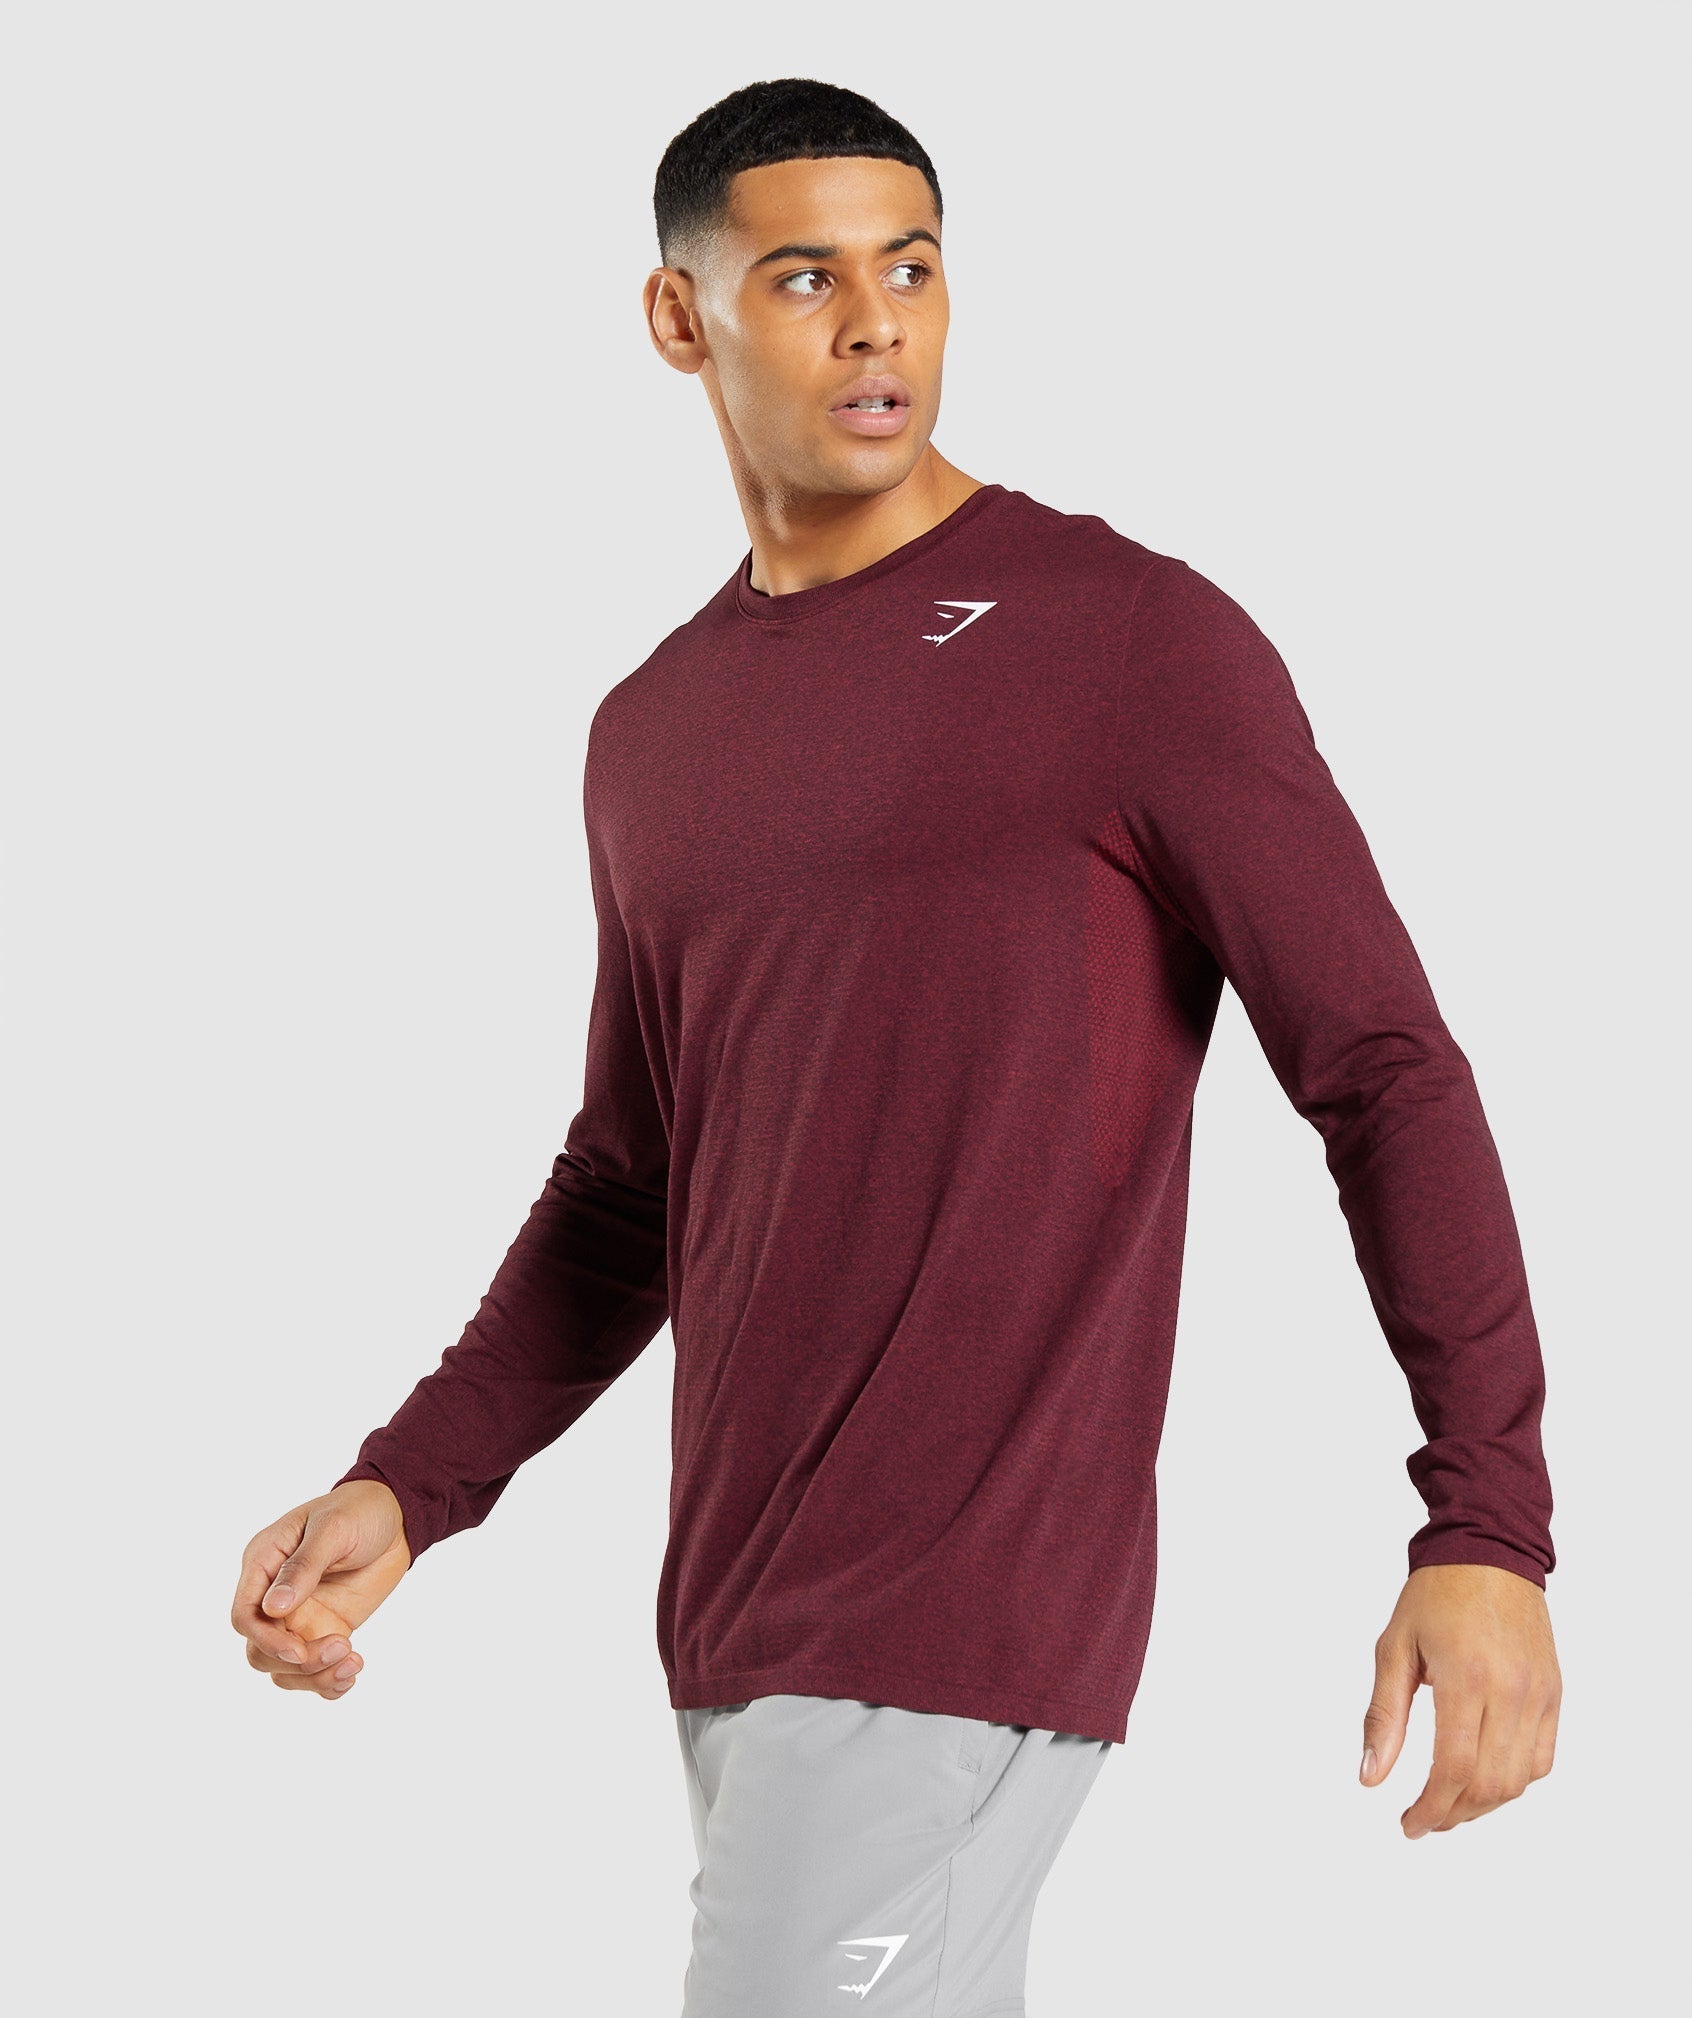 Arrival Seamless Long Sleeve T-Shirt in Burgundy Red Marl - view 4